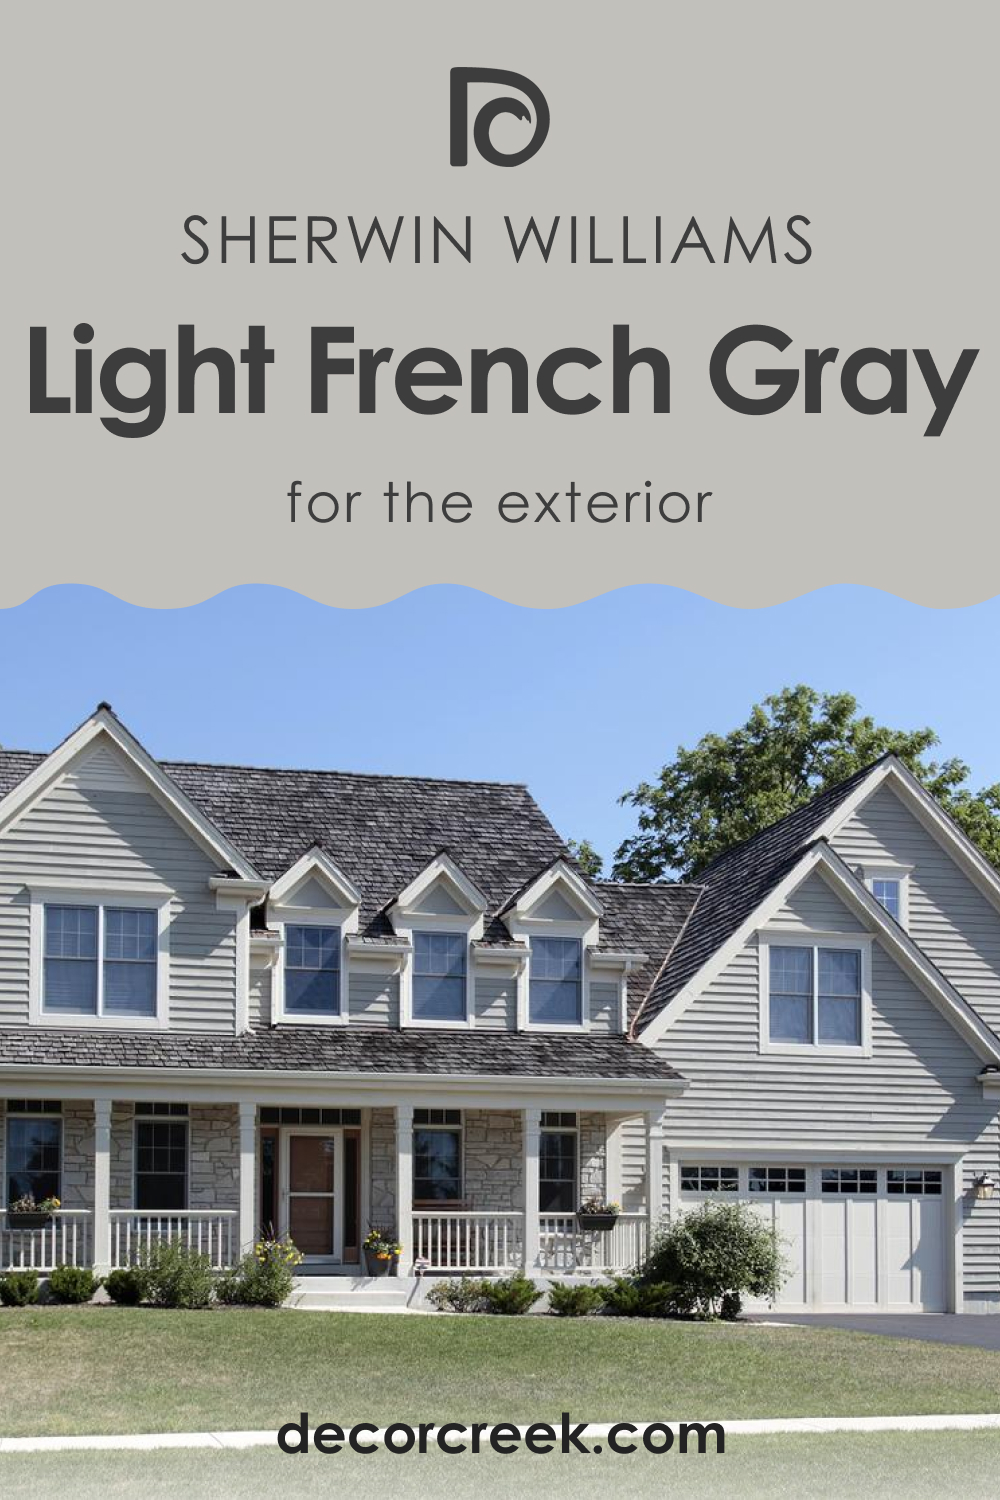 How to Use SW 0055 Light French Gray for an Exterior?